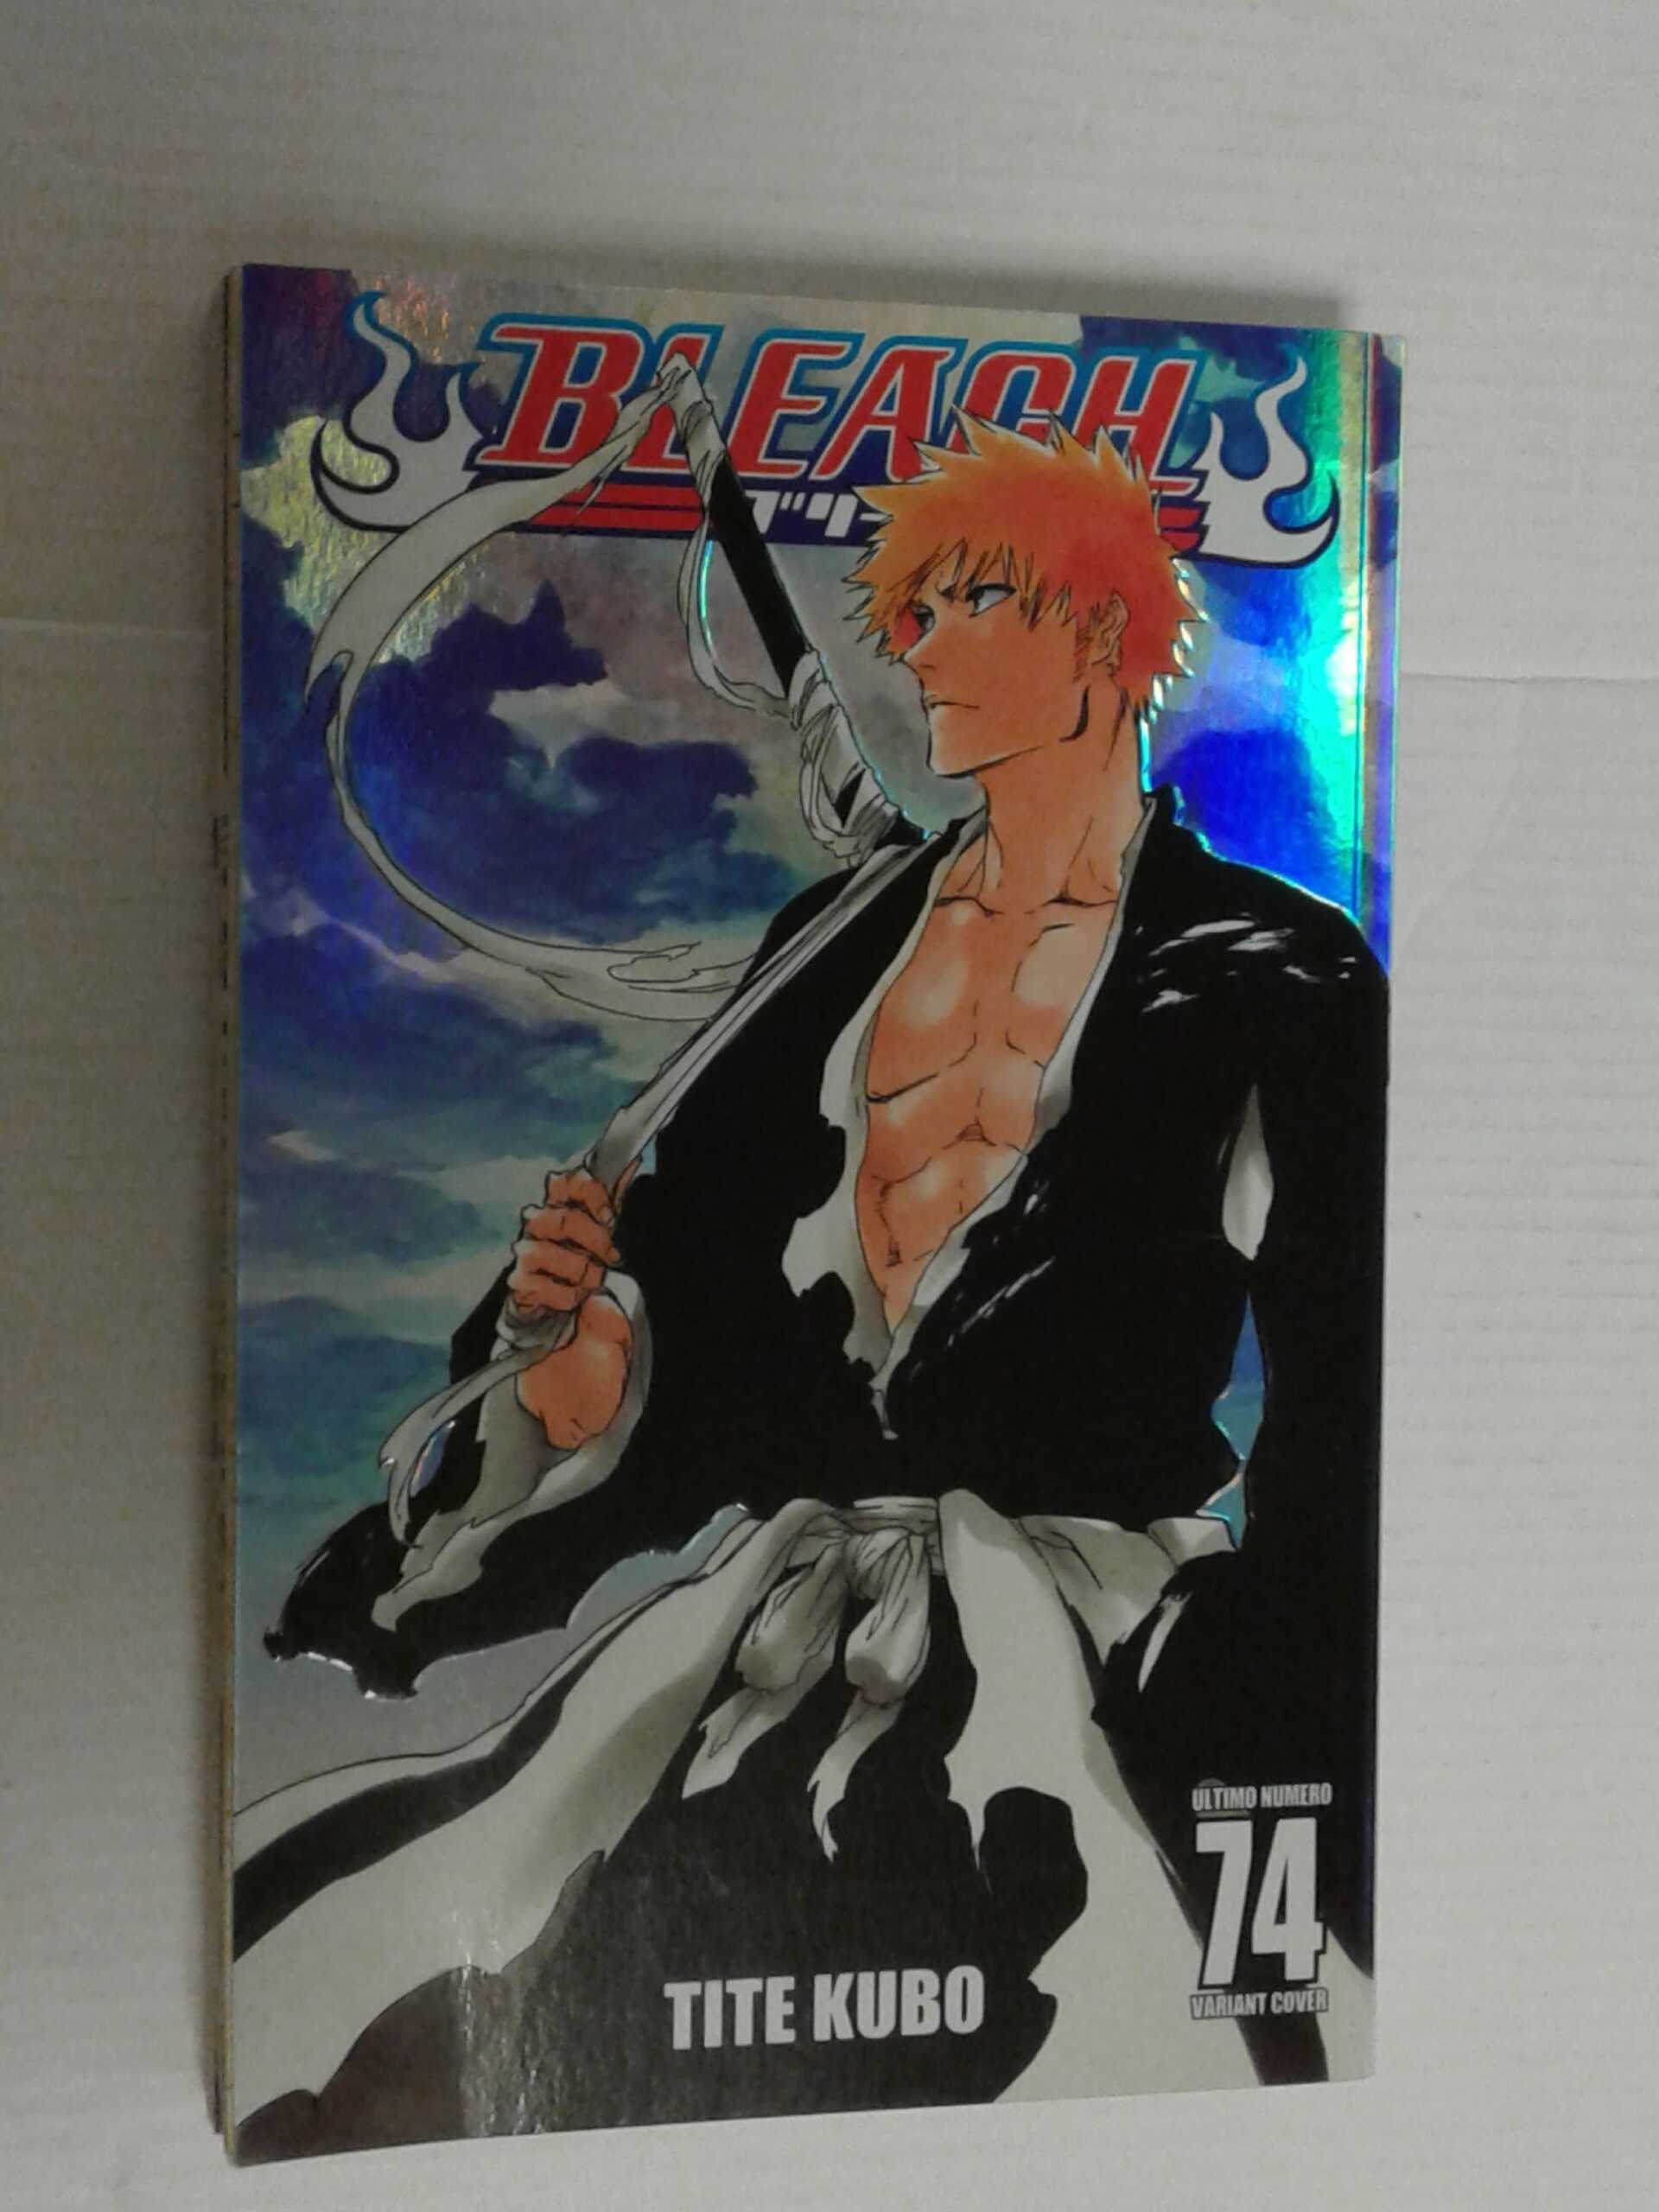 ART] New official BLEACH art of Ichigo and Rukia by Tite Kubo for the  upcoming BLEACH eOneBook with digital versions of all 74 manga volumes :  r/manga